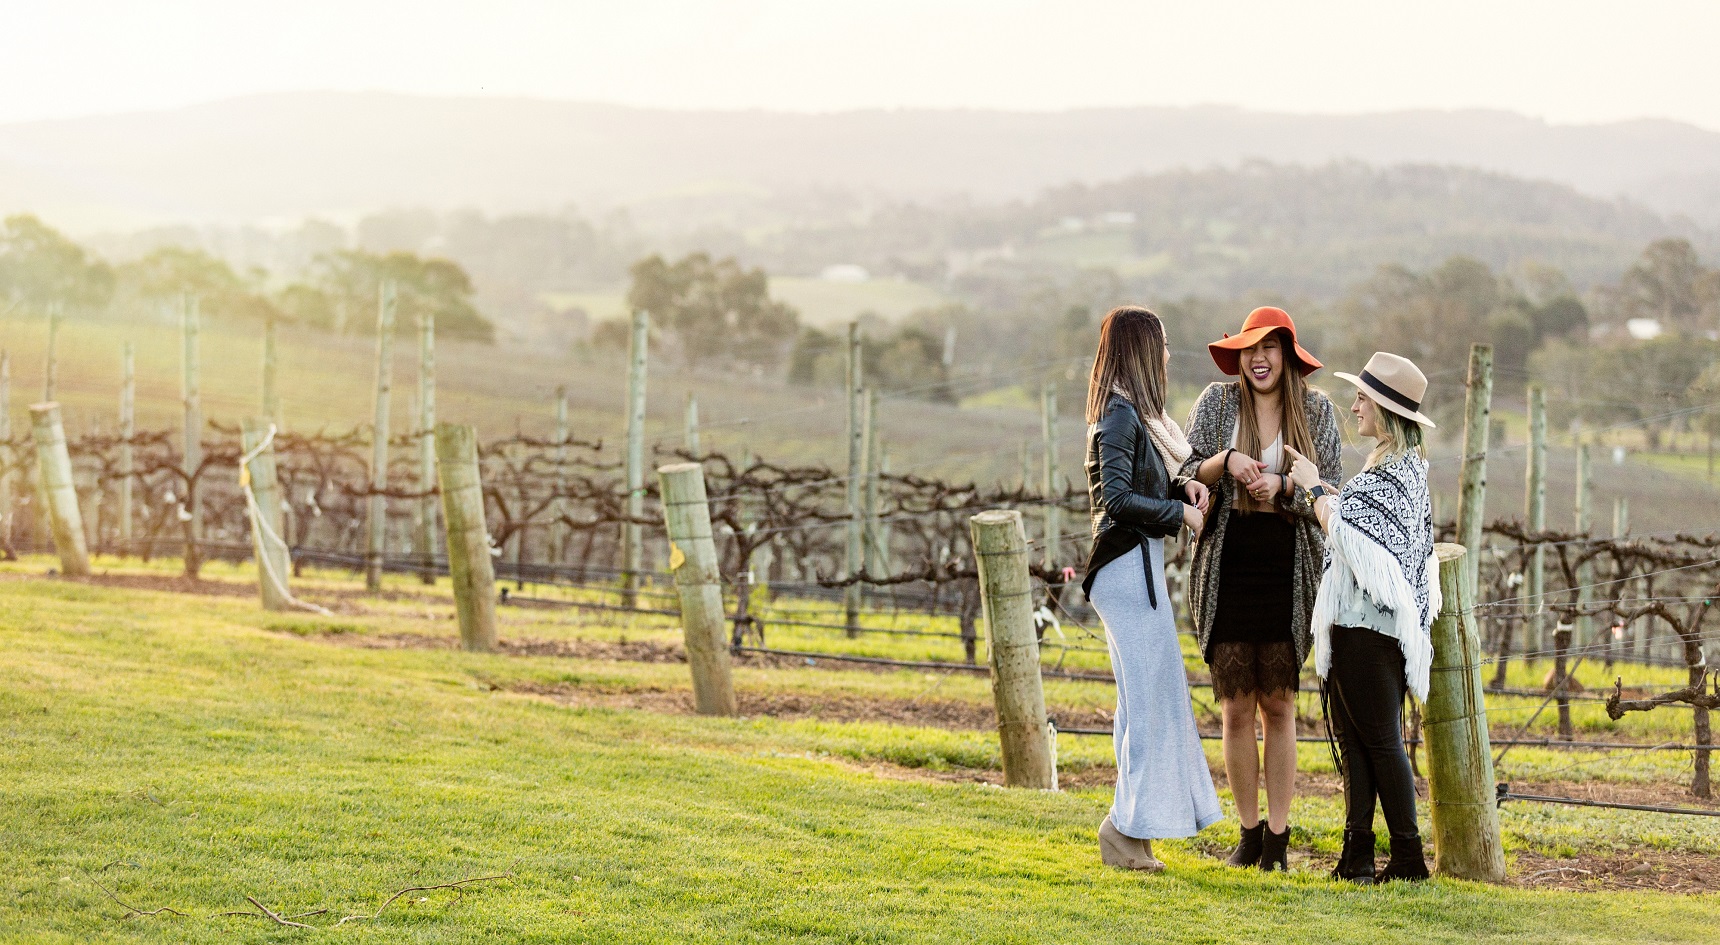 Three women talking amongst themselves in front of a vineyard in the Adelaide Hills.